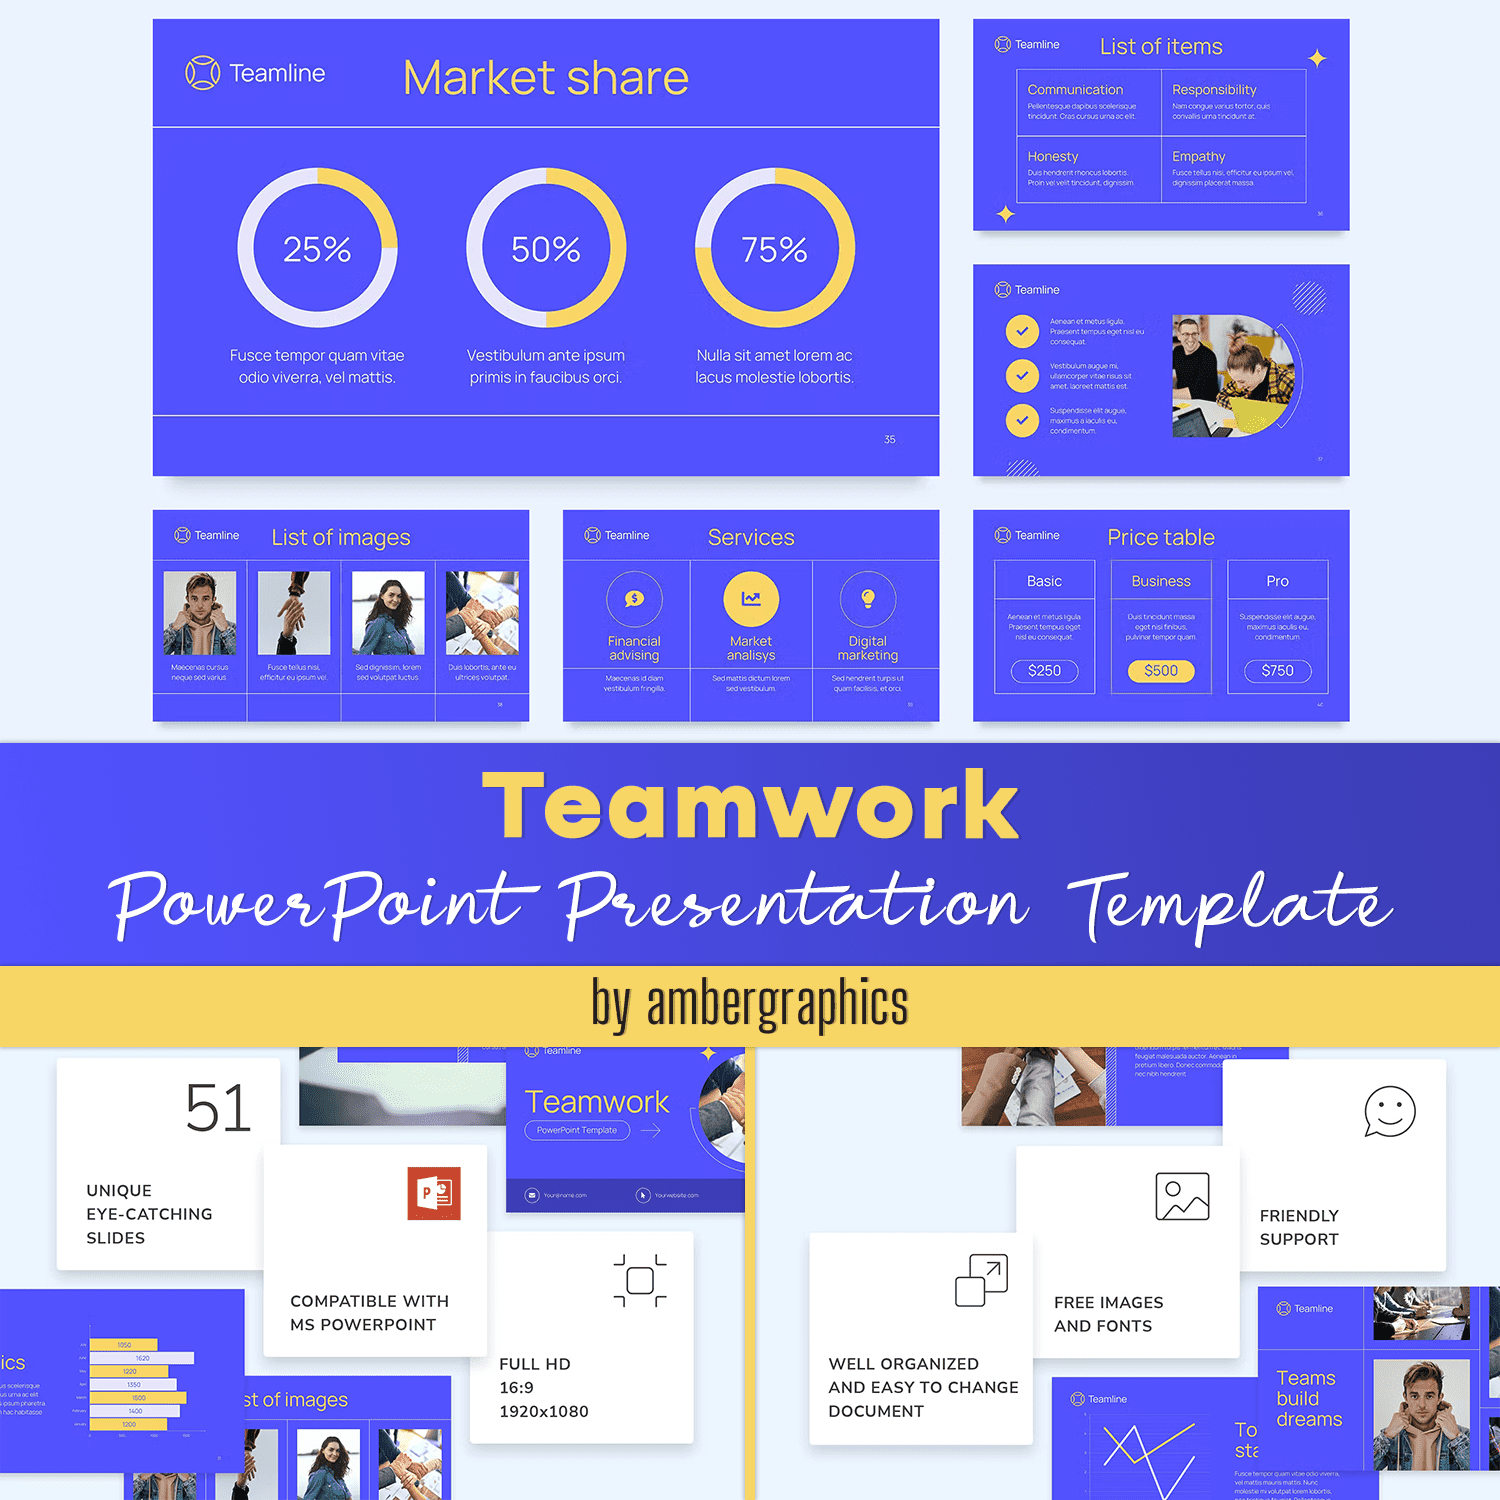 A selection of images of elegant presentation template slides on the theme of teamwork.